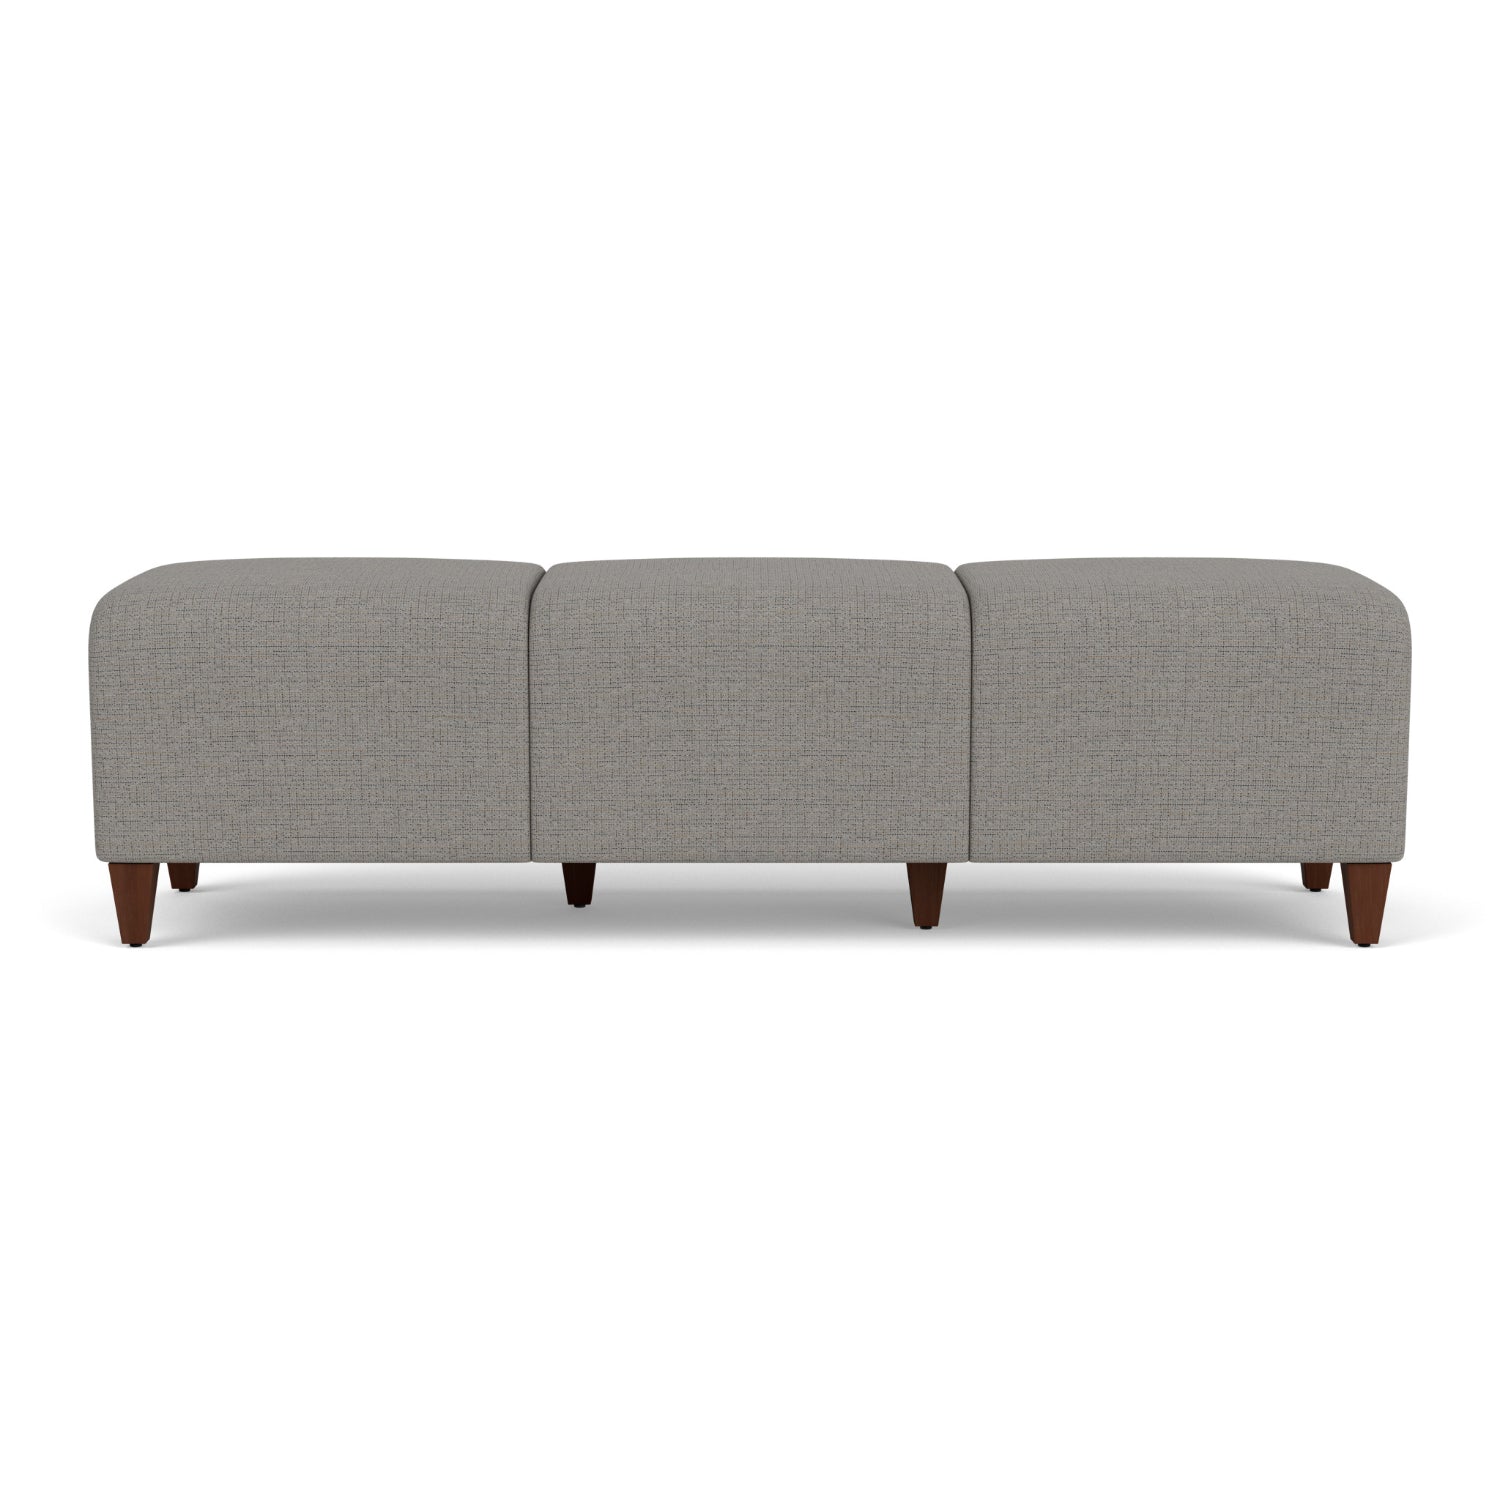 Siena Collection Reception Seating, 3-Seat Bench, Designer Fabric Upholstery, FREE SHIPPING